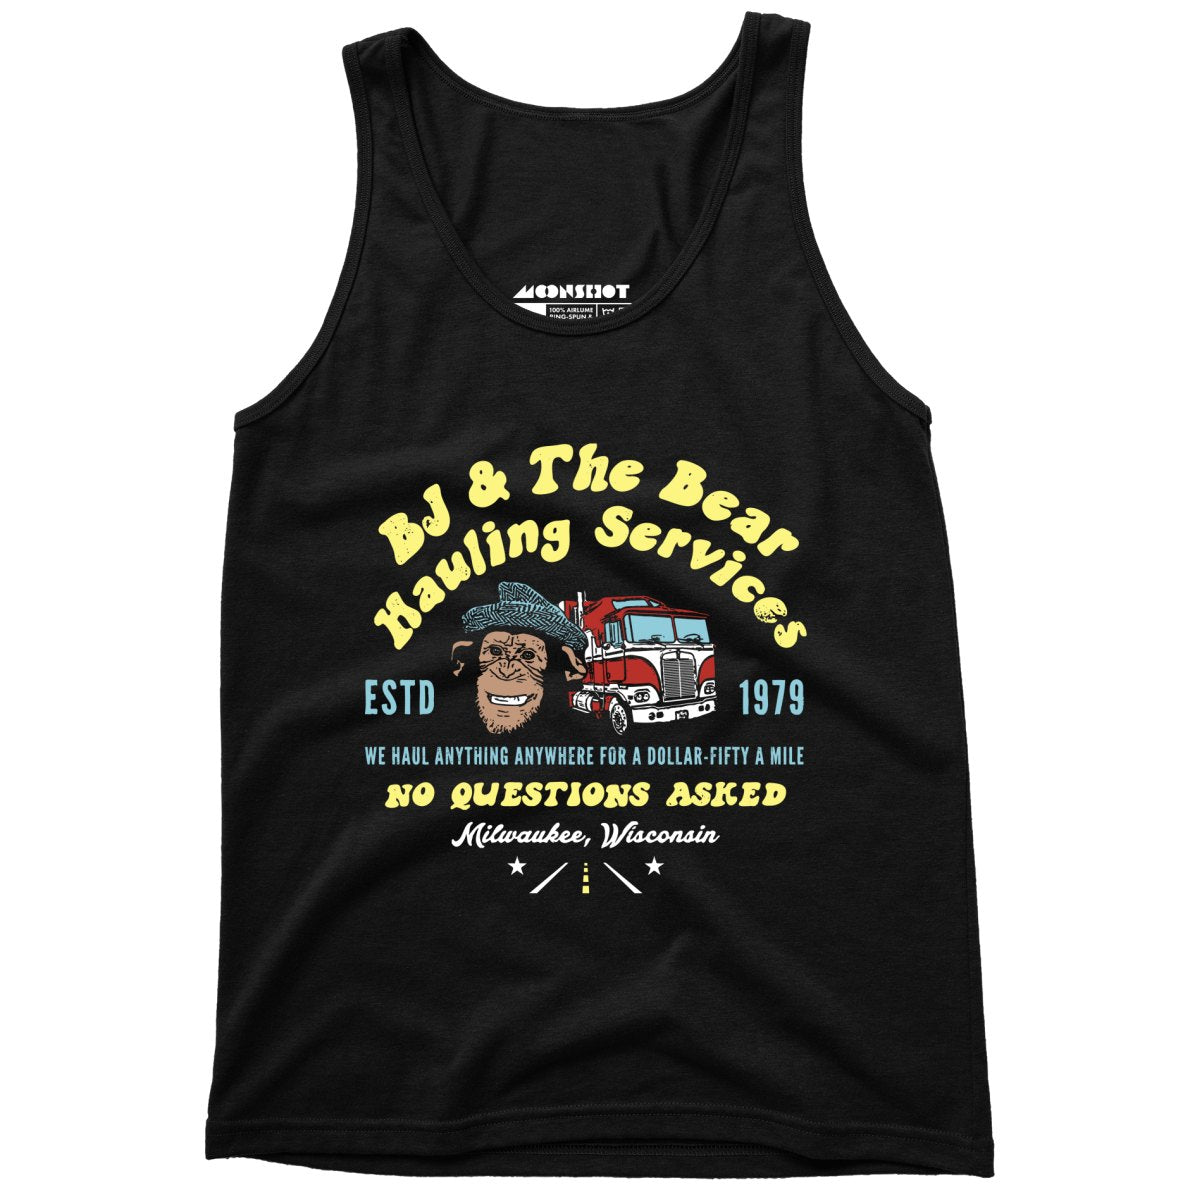 BJ & The Bear Hauling Services - Unisex Tank Top